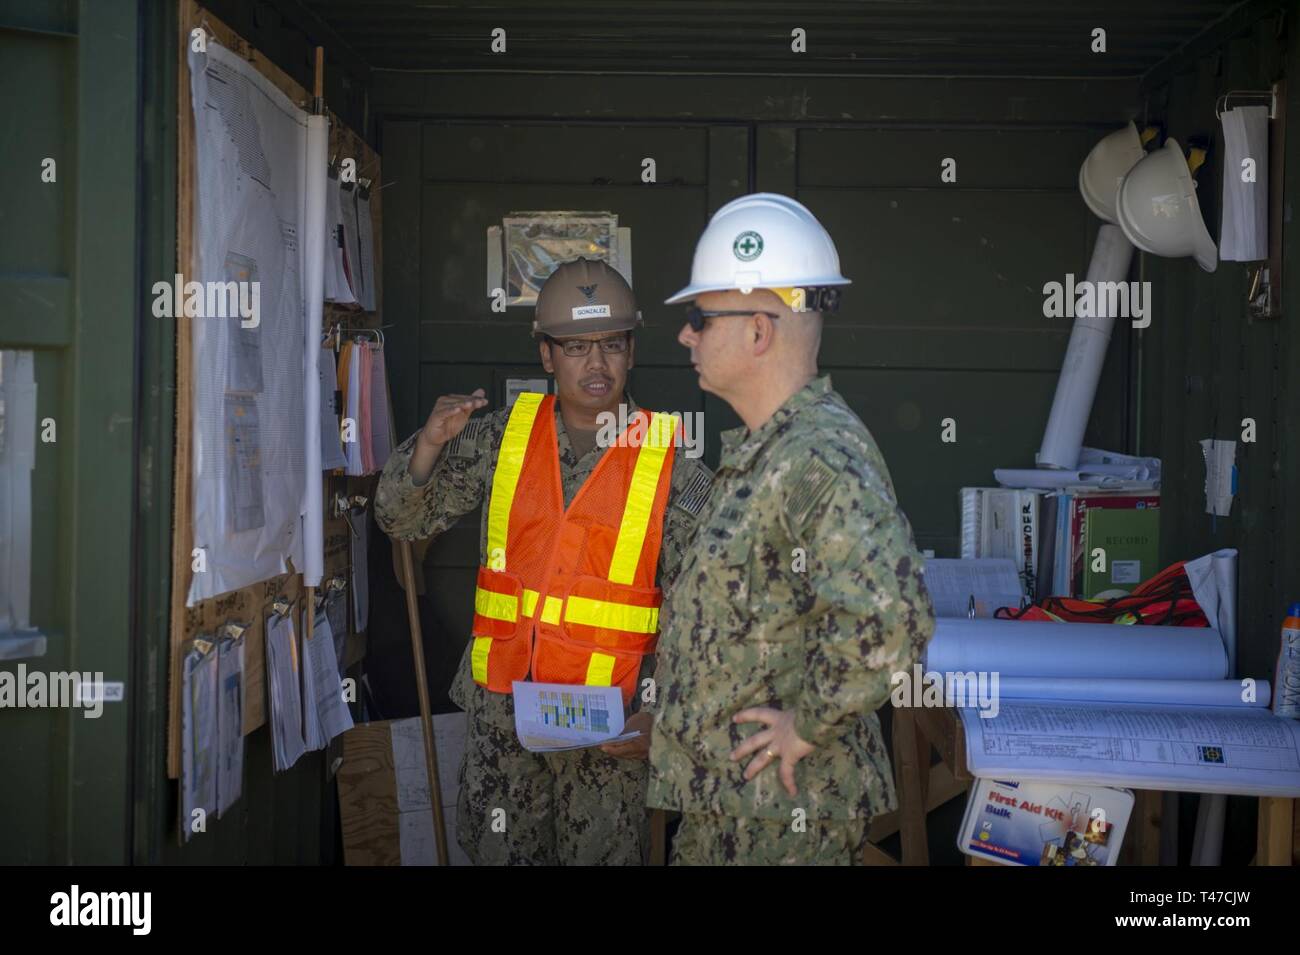 ROTA, Spain (March 15, 2019) Utilitiesman 1st Class Josue Gonzalez, assigned to Naval Mobile Construction Battalion (NMCB) 133, discusses the progress of the Tow Way Street lighting project site with Rear Adm. John Korka, commander of Naval Facilities Engineering Command, during his visit to Camp Mitchell onboard Naval Station Rota, Spain. NMCB-133 is forward deployed to execute construction, humanitarian and foreign assistance, and theater security cooperation in the U.S. 6th Fleet area of operations. Stock Photo